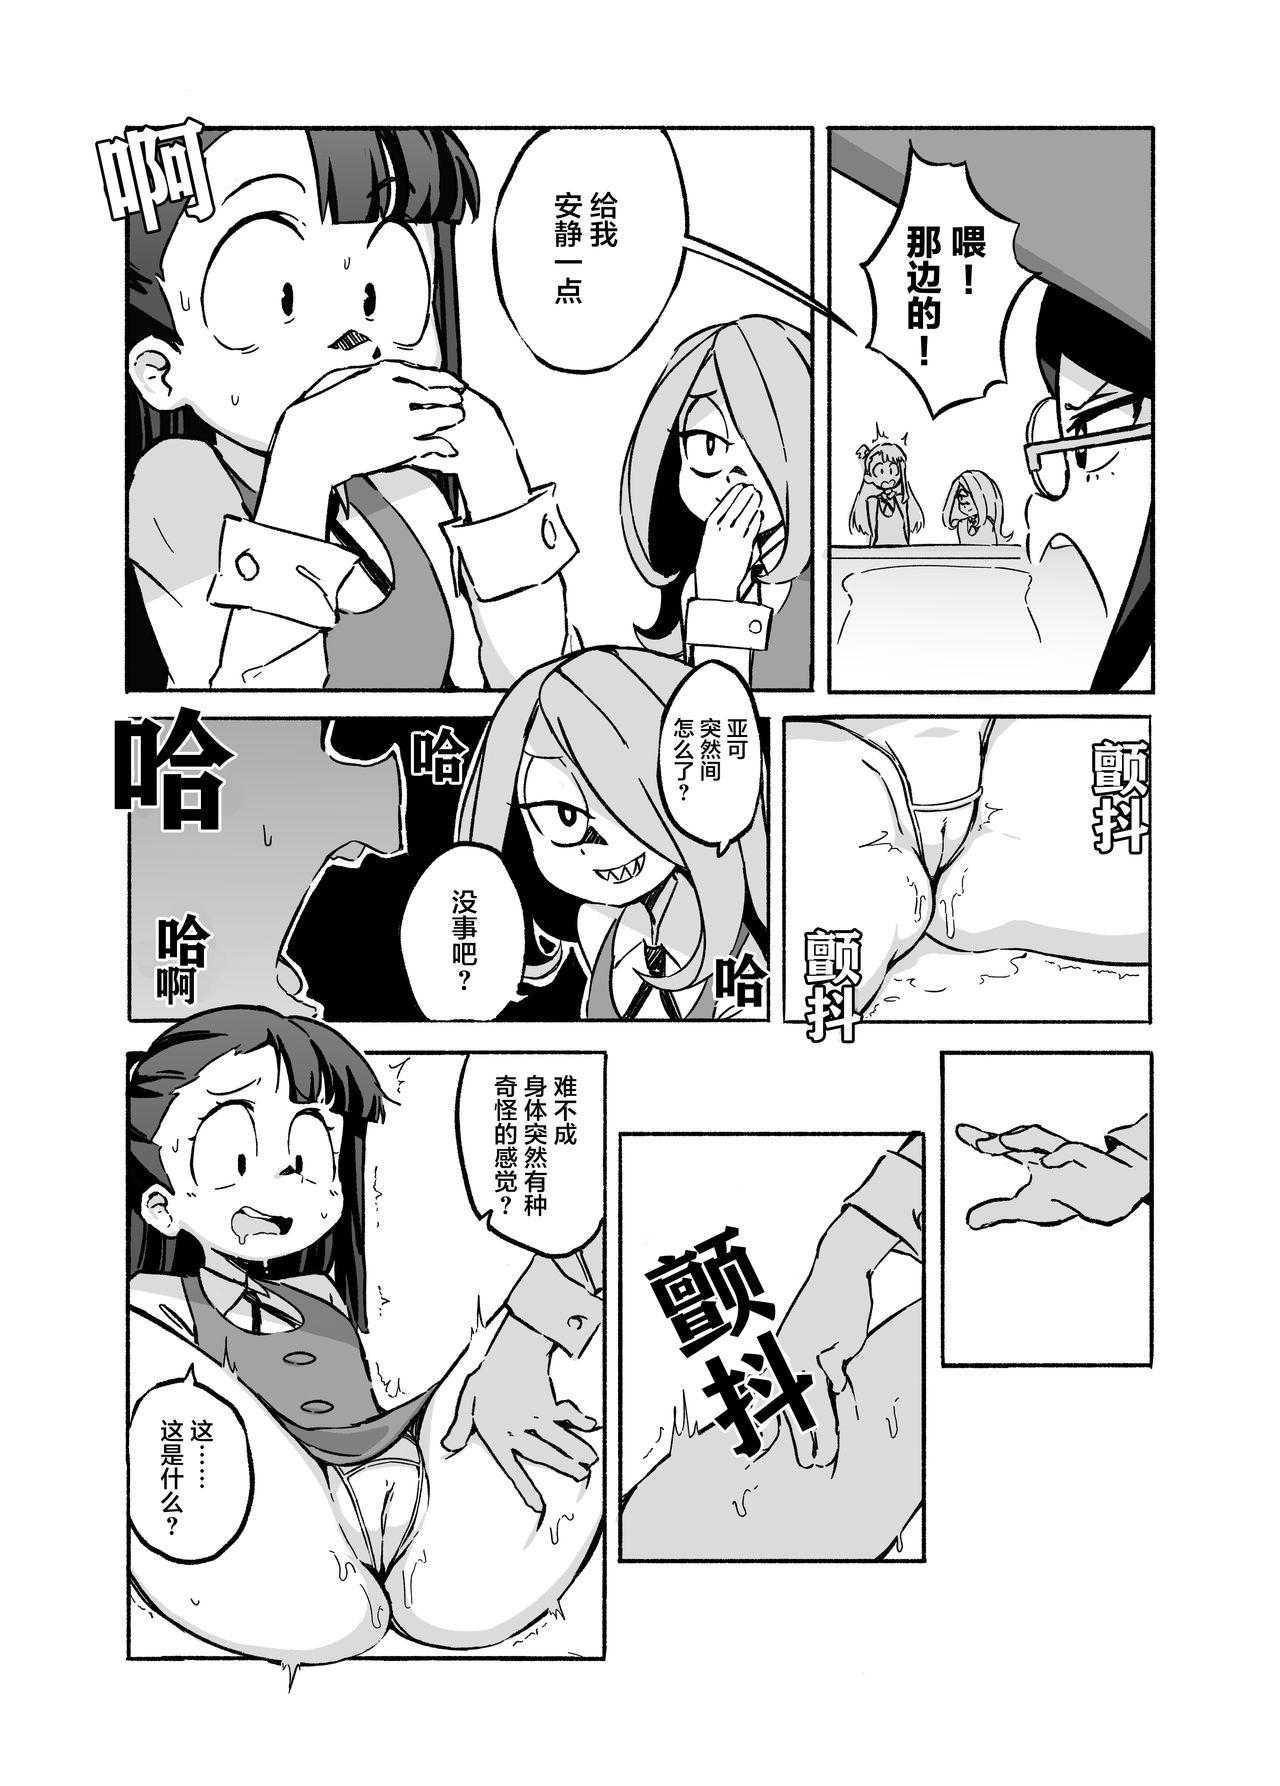 Gozo Mushroom Fever - Little witch academia Spanish - Page 9